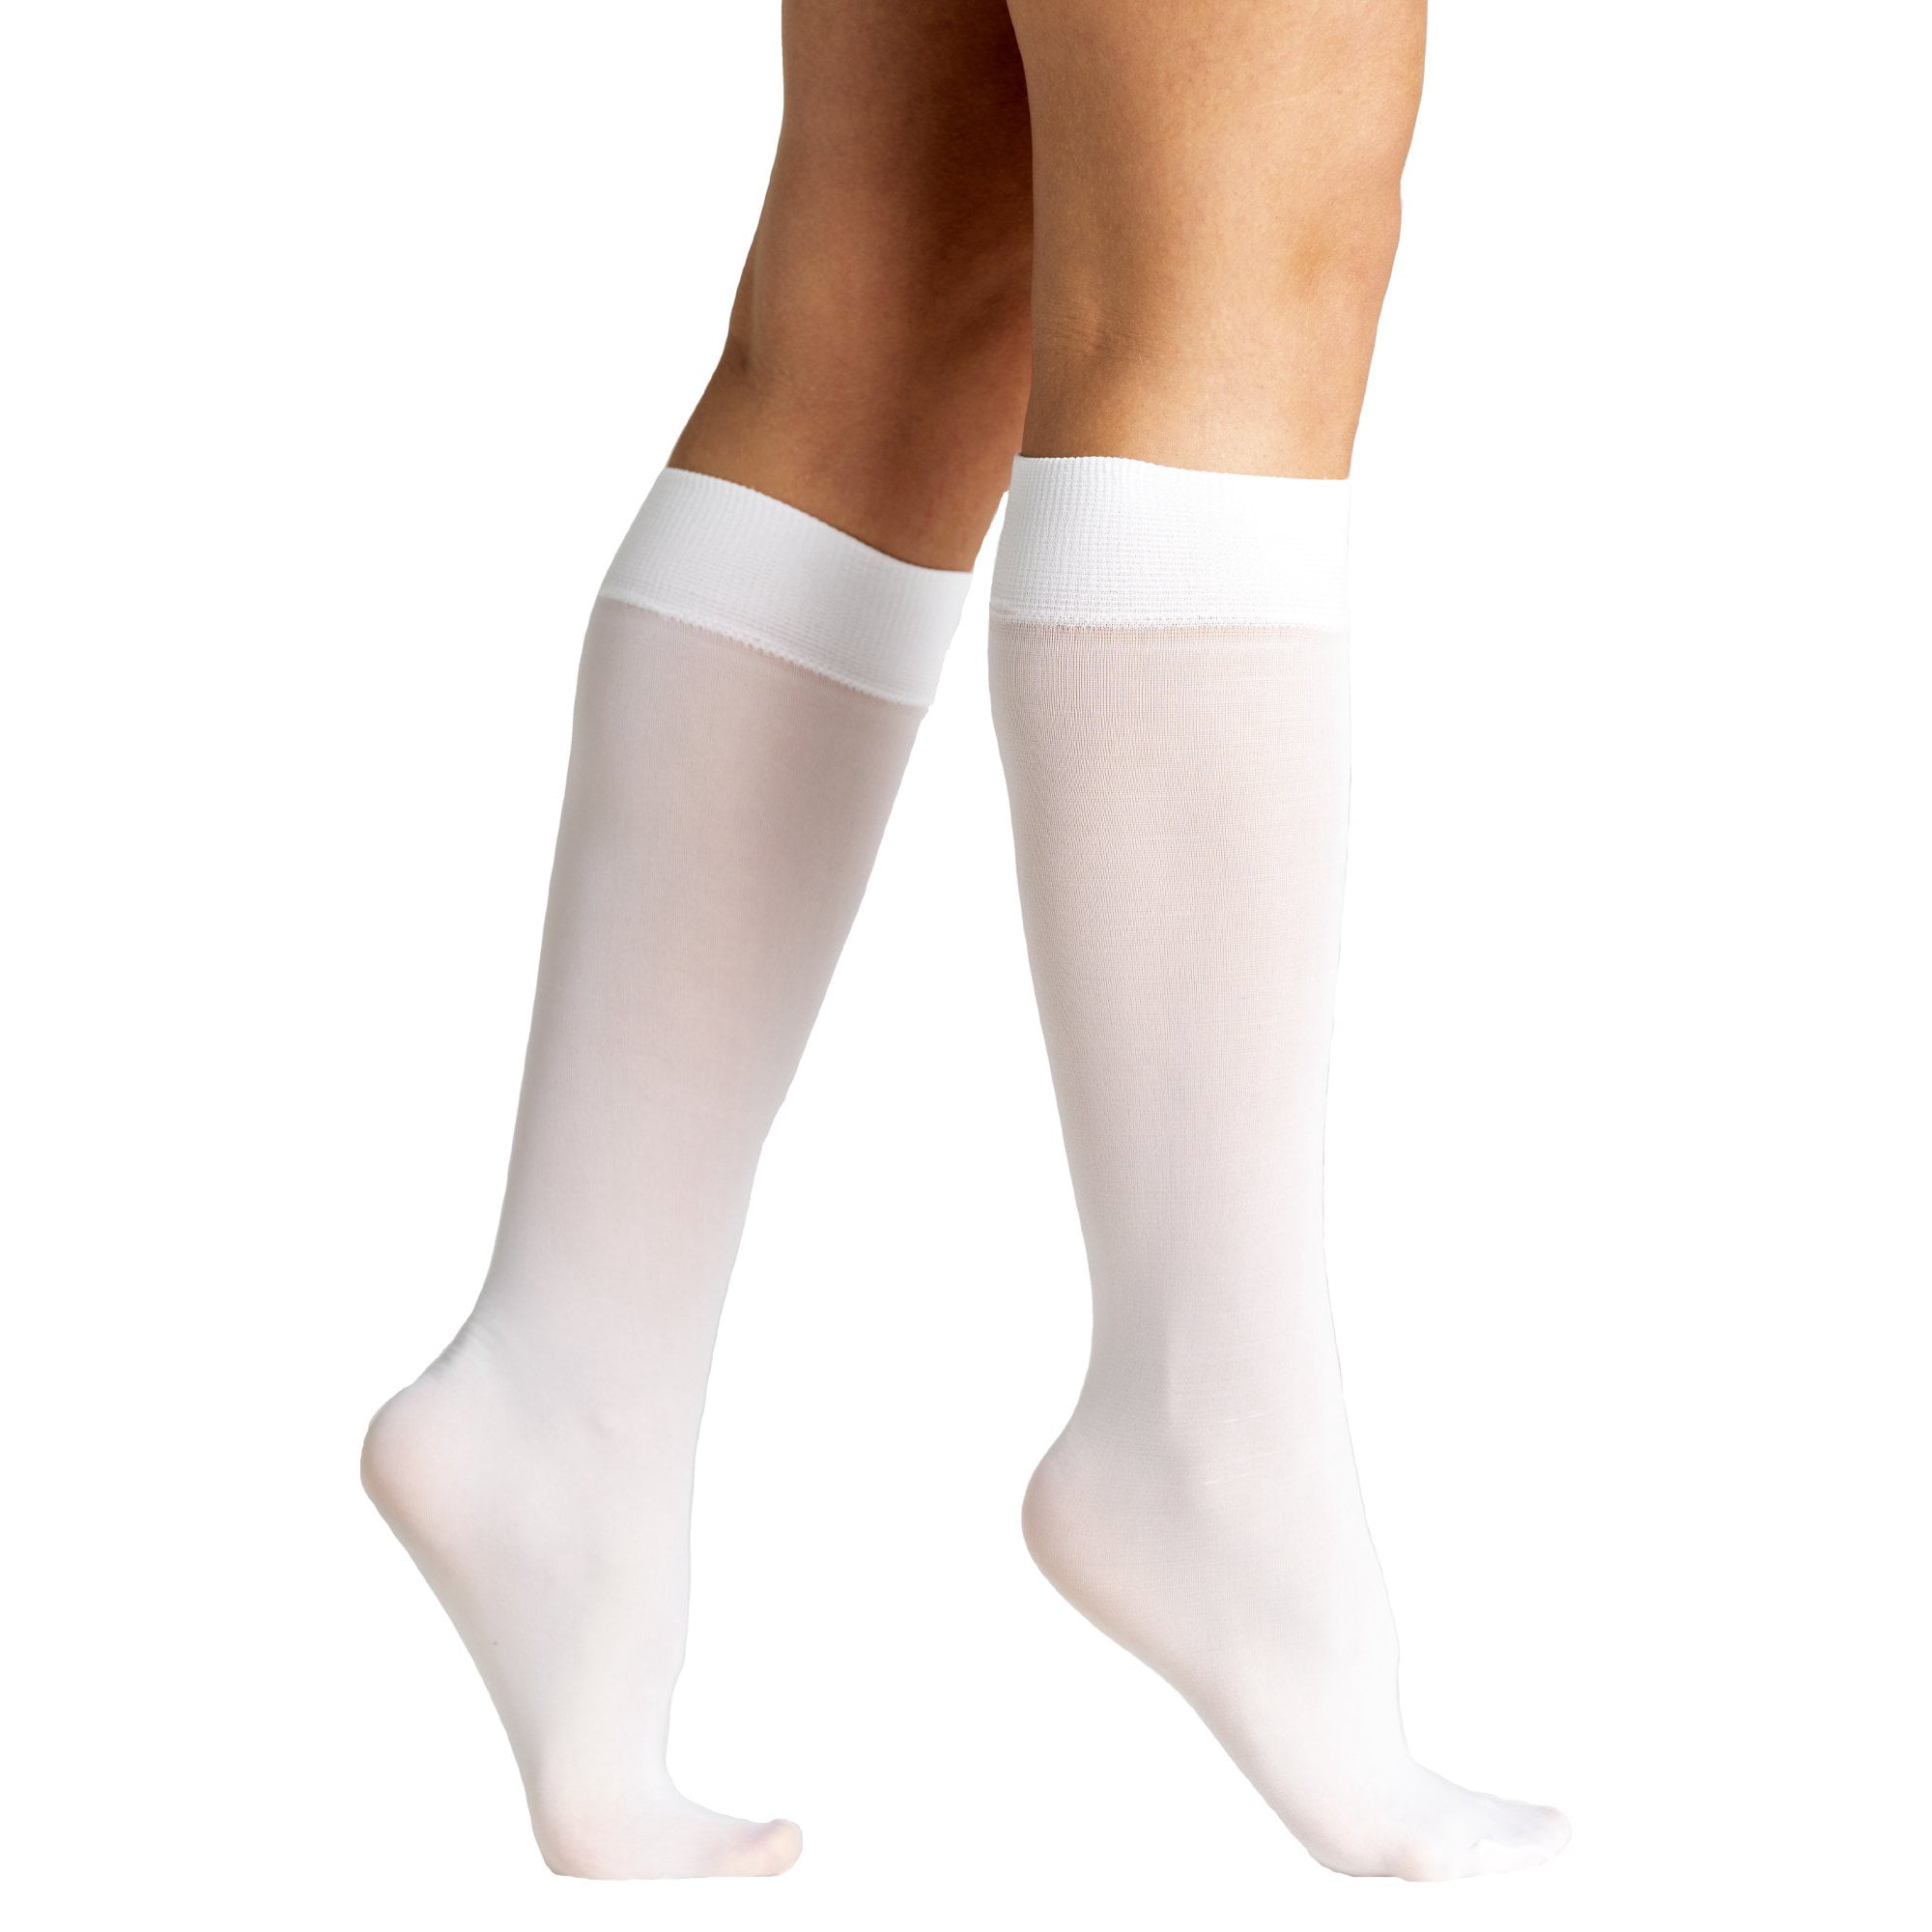 6 Pairs Women Knee High Trouser Socks Opaque Stretchy Spandex (White) |  Groupon